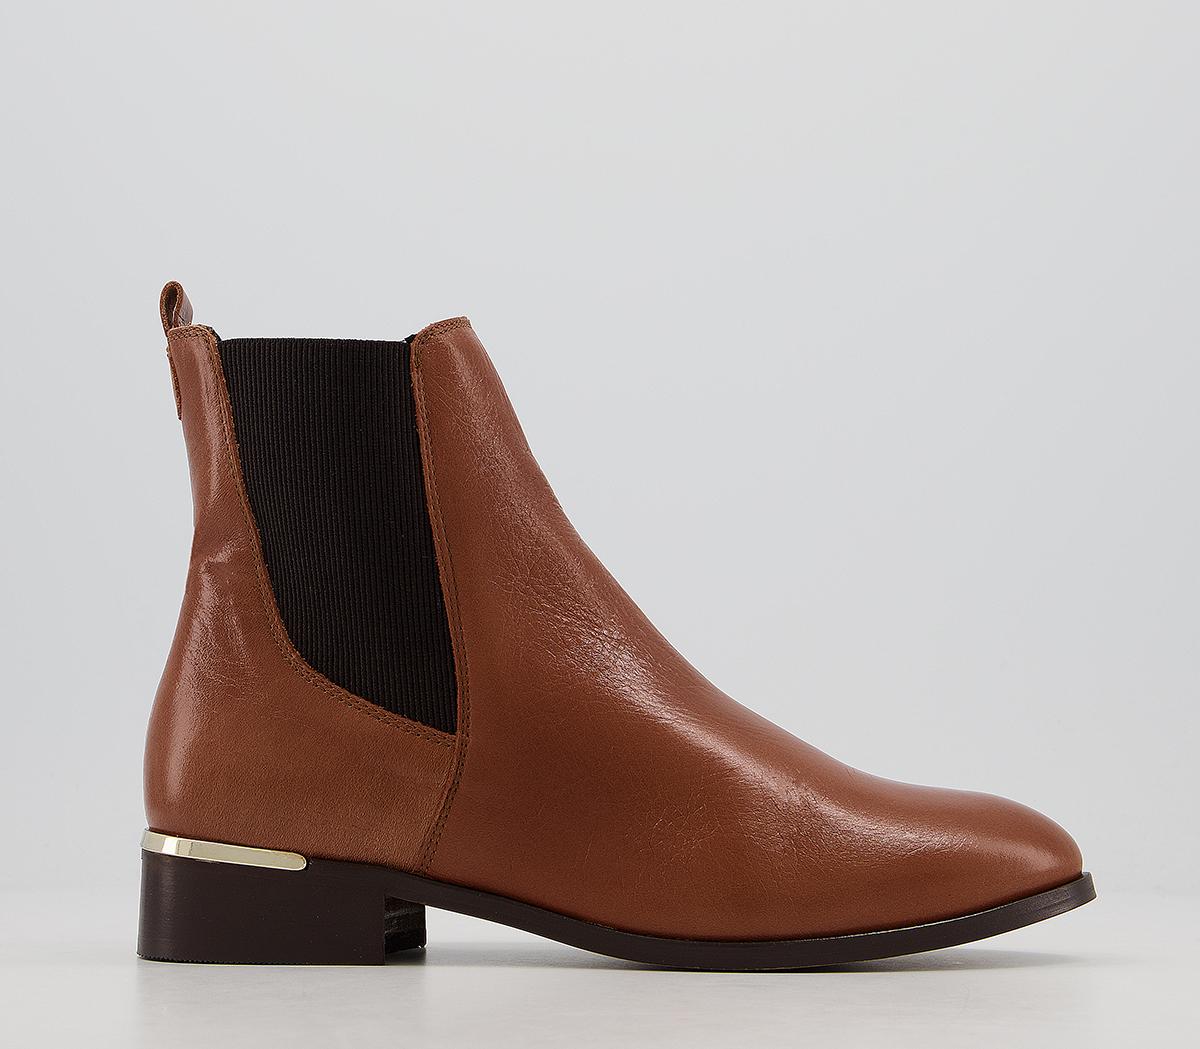 OFFICEAnika Smart Chelsea Boots With Metal ClipTan Leather